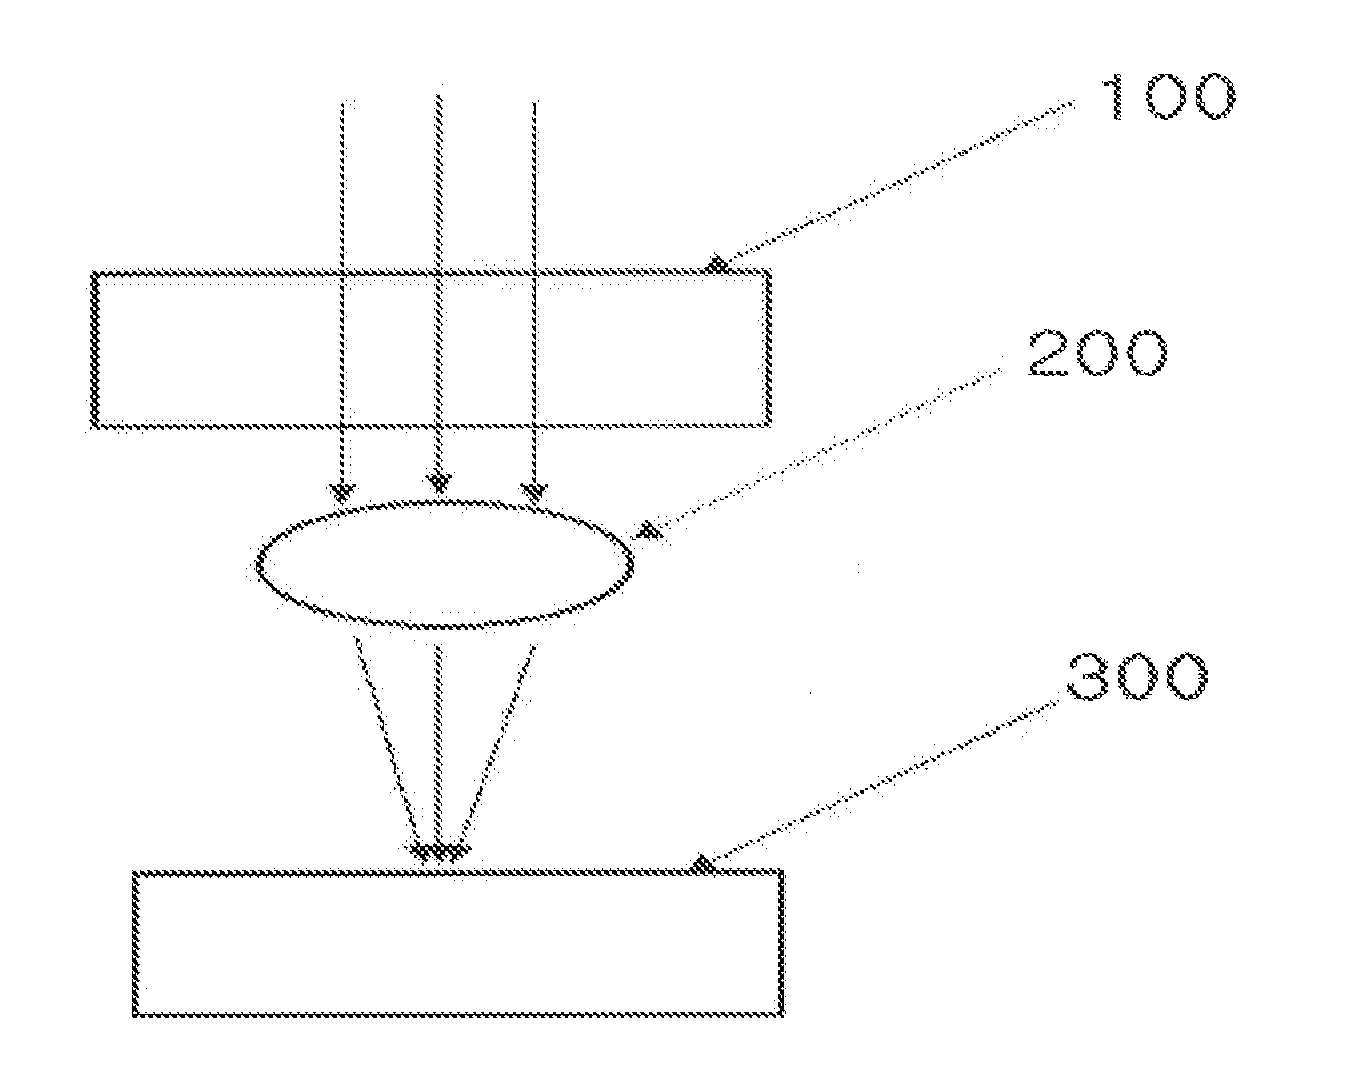 Optical receiver using wavelength tunable filter